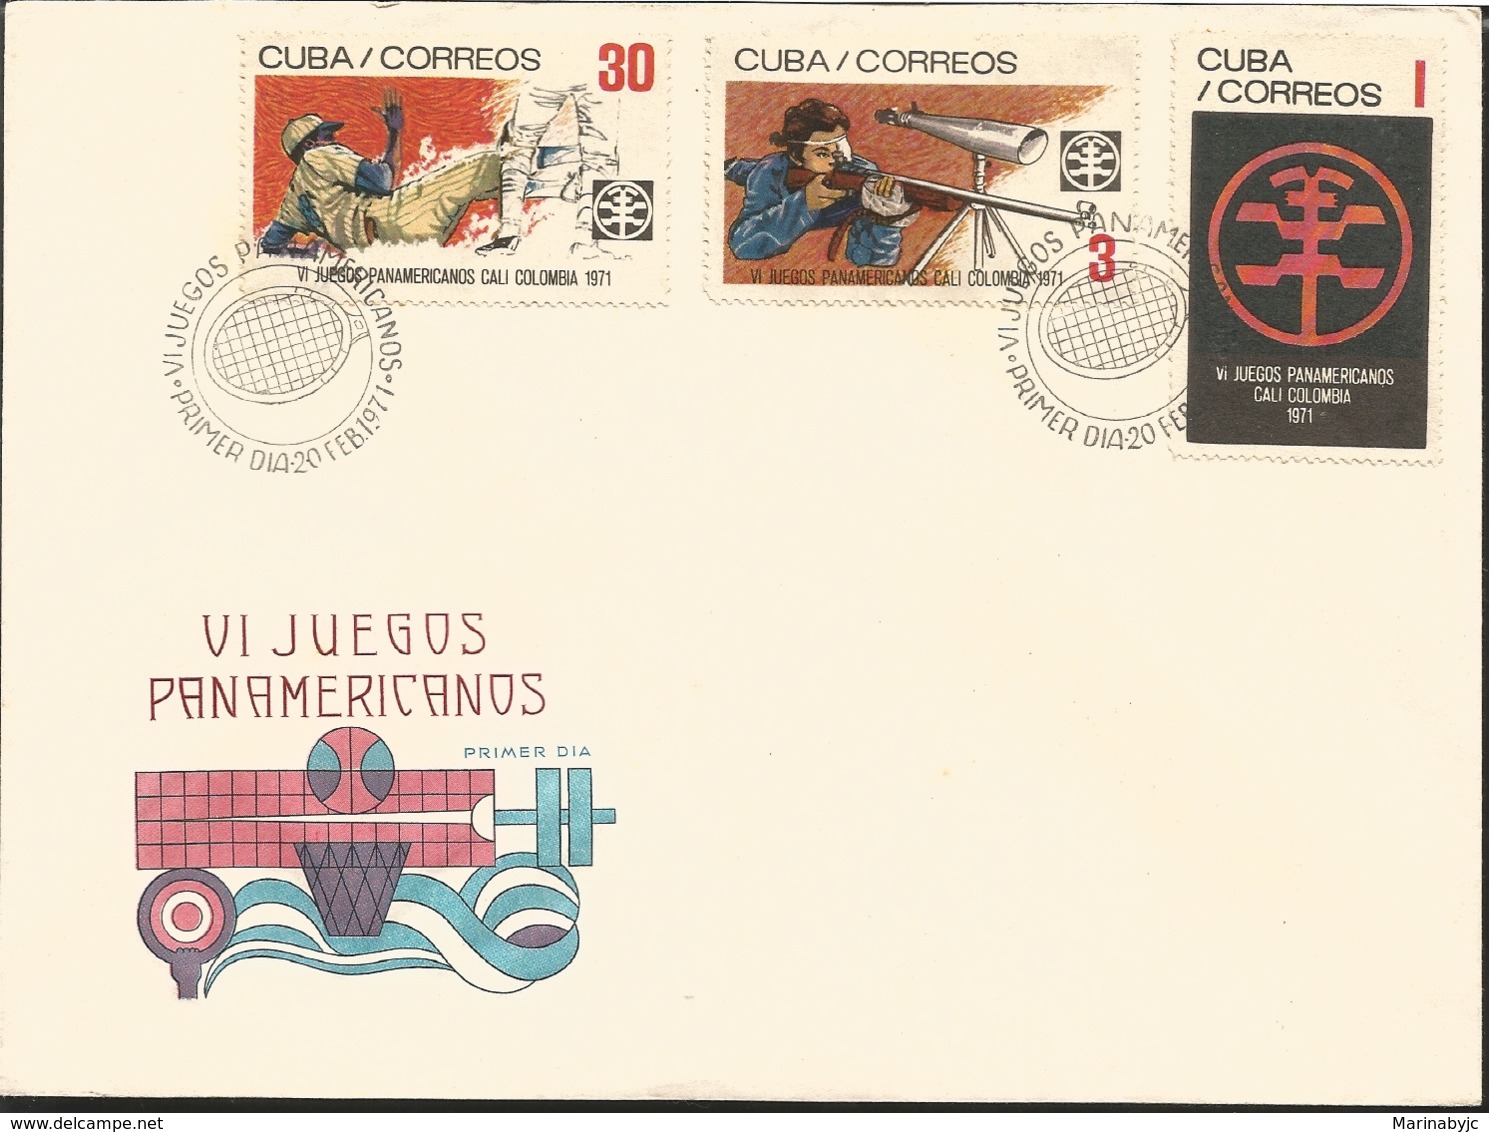 V) 1971 CARIBBEAN, 6TH PAN AMERICAN GAMES, CALI, COLOMBIA, BASEBALL, RIFLE SHOOTING, EMBLEM, WITH SLOGAN CANCELATION IN - Briefe U. Dokumente